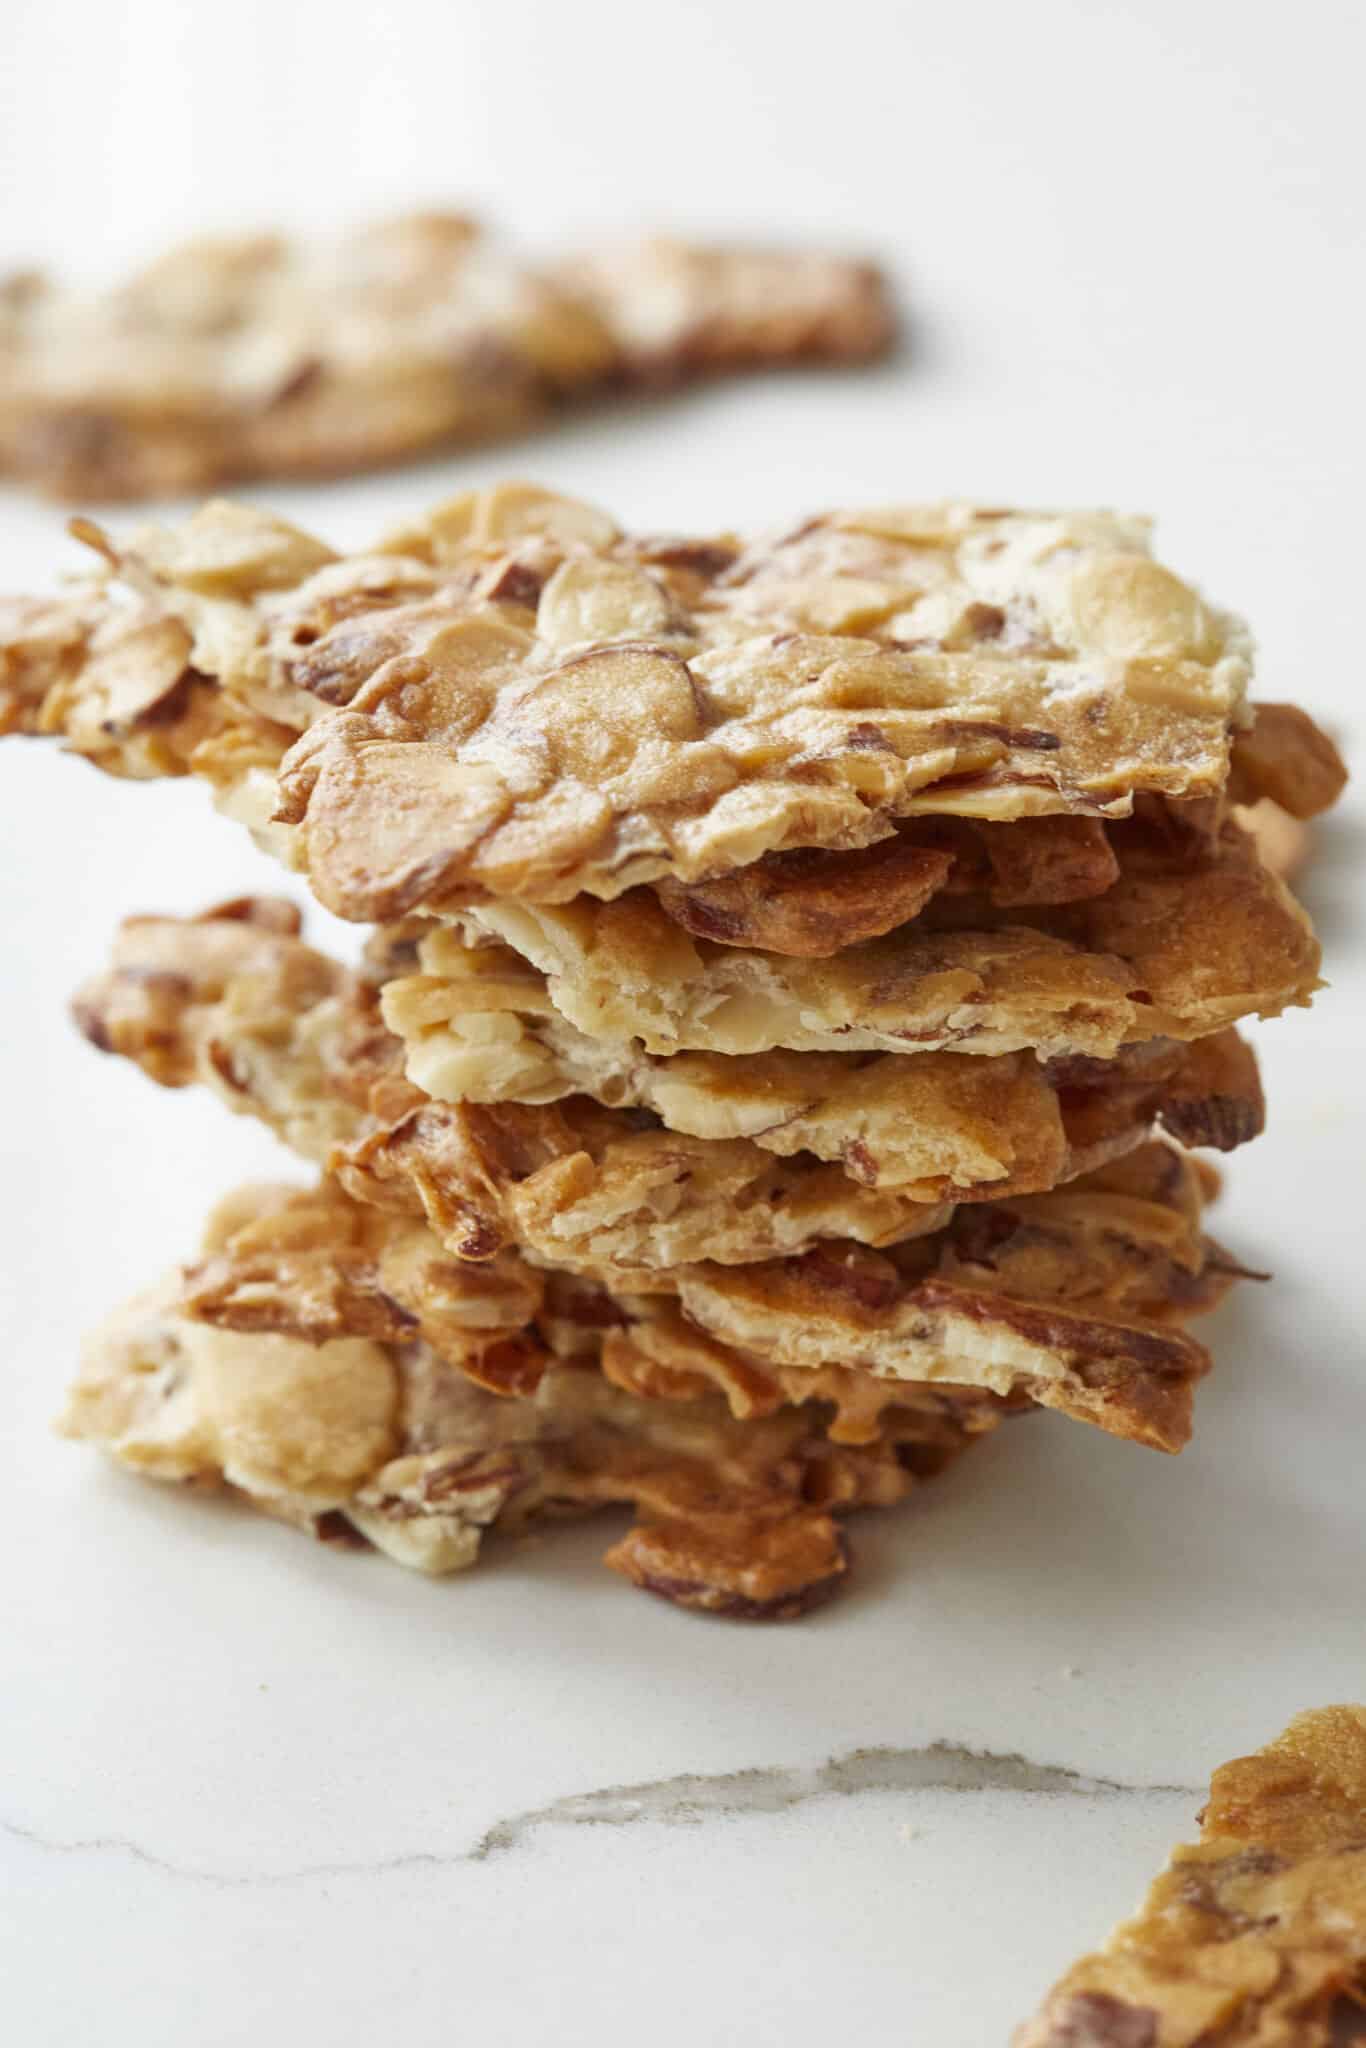 A close shot at a stack of satisfying Almond Crisps shows thin slivered almonds that are baked until crunchy and caramelized golden brown. 